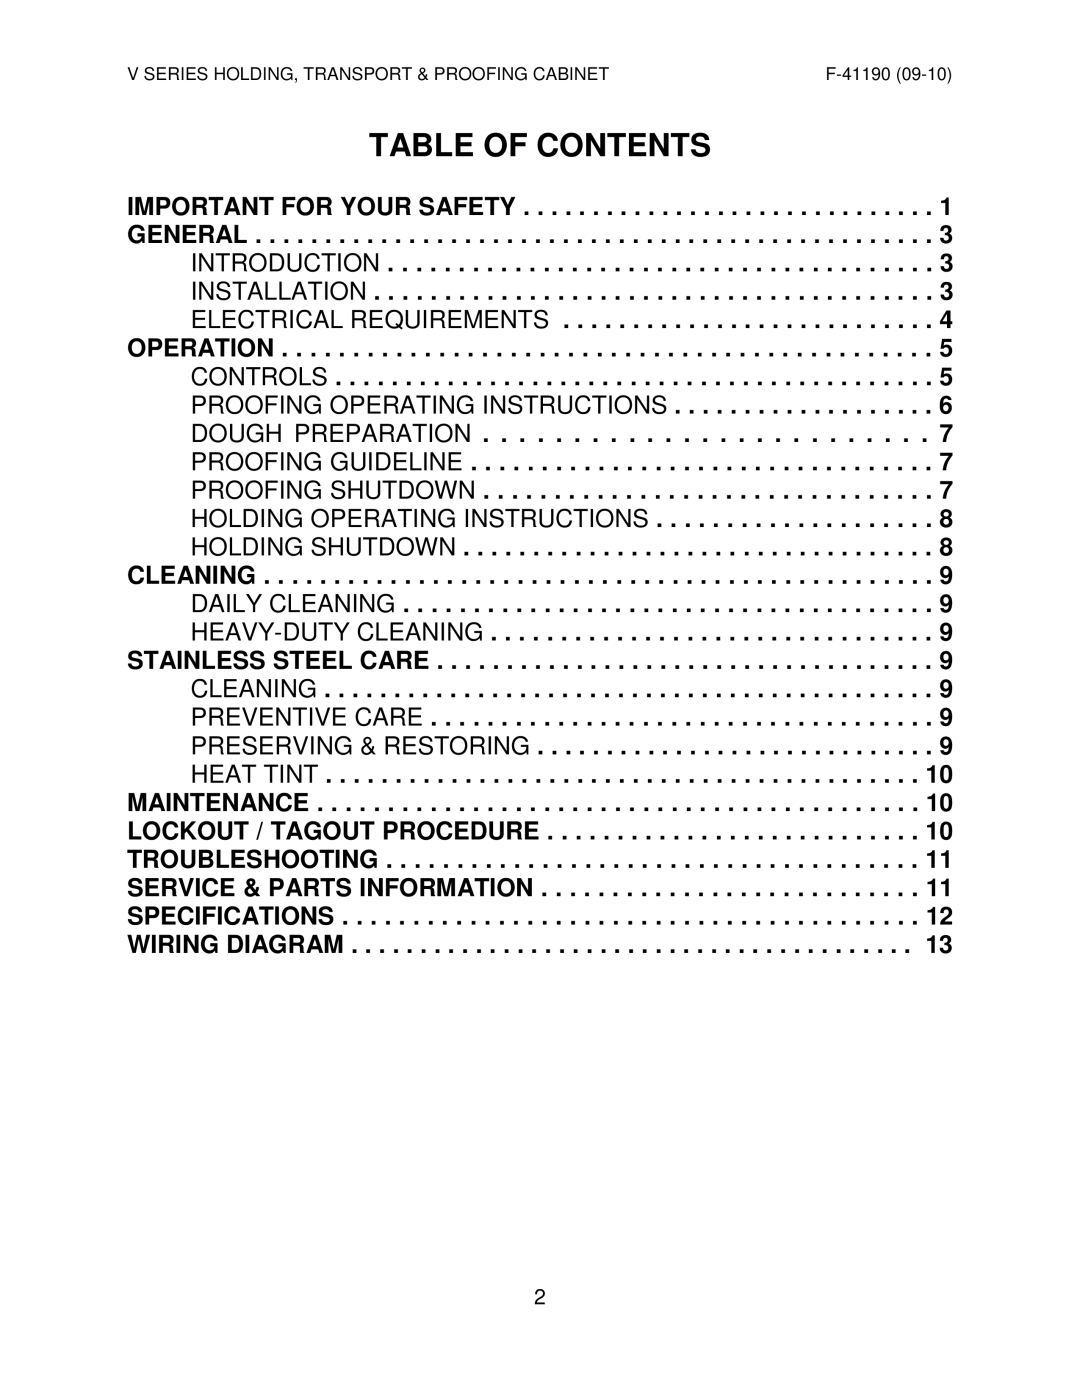 Vulcan-Hart VP18 ML-138089 operation manual Table of Contents 